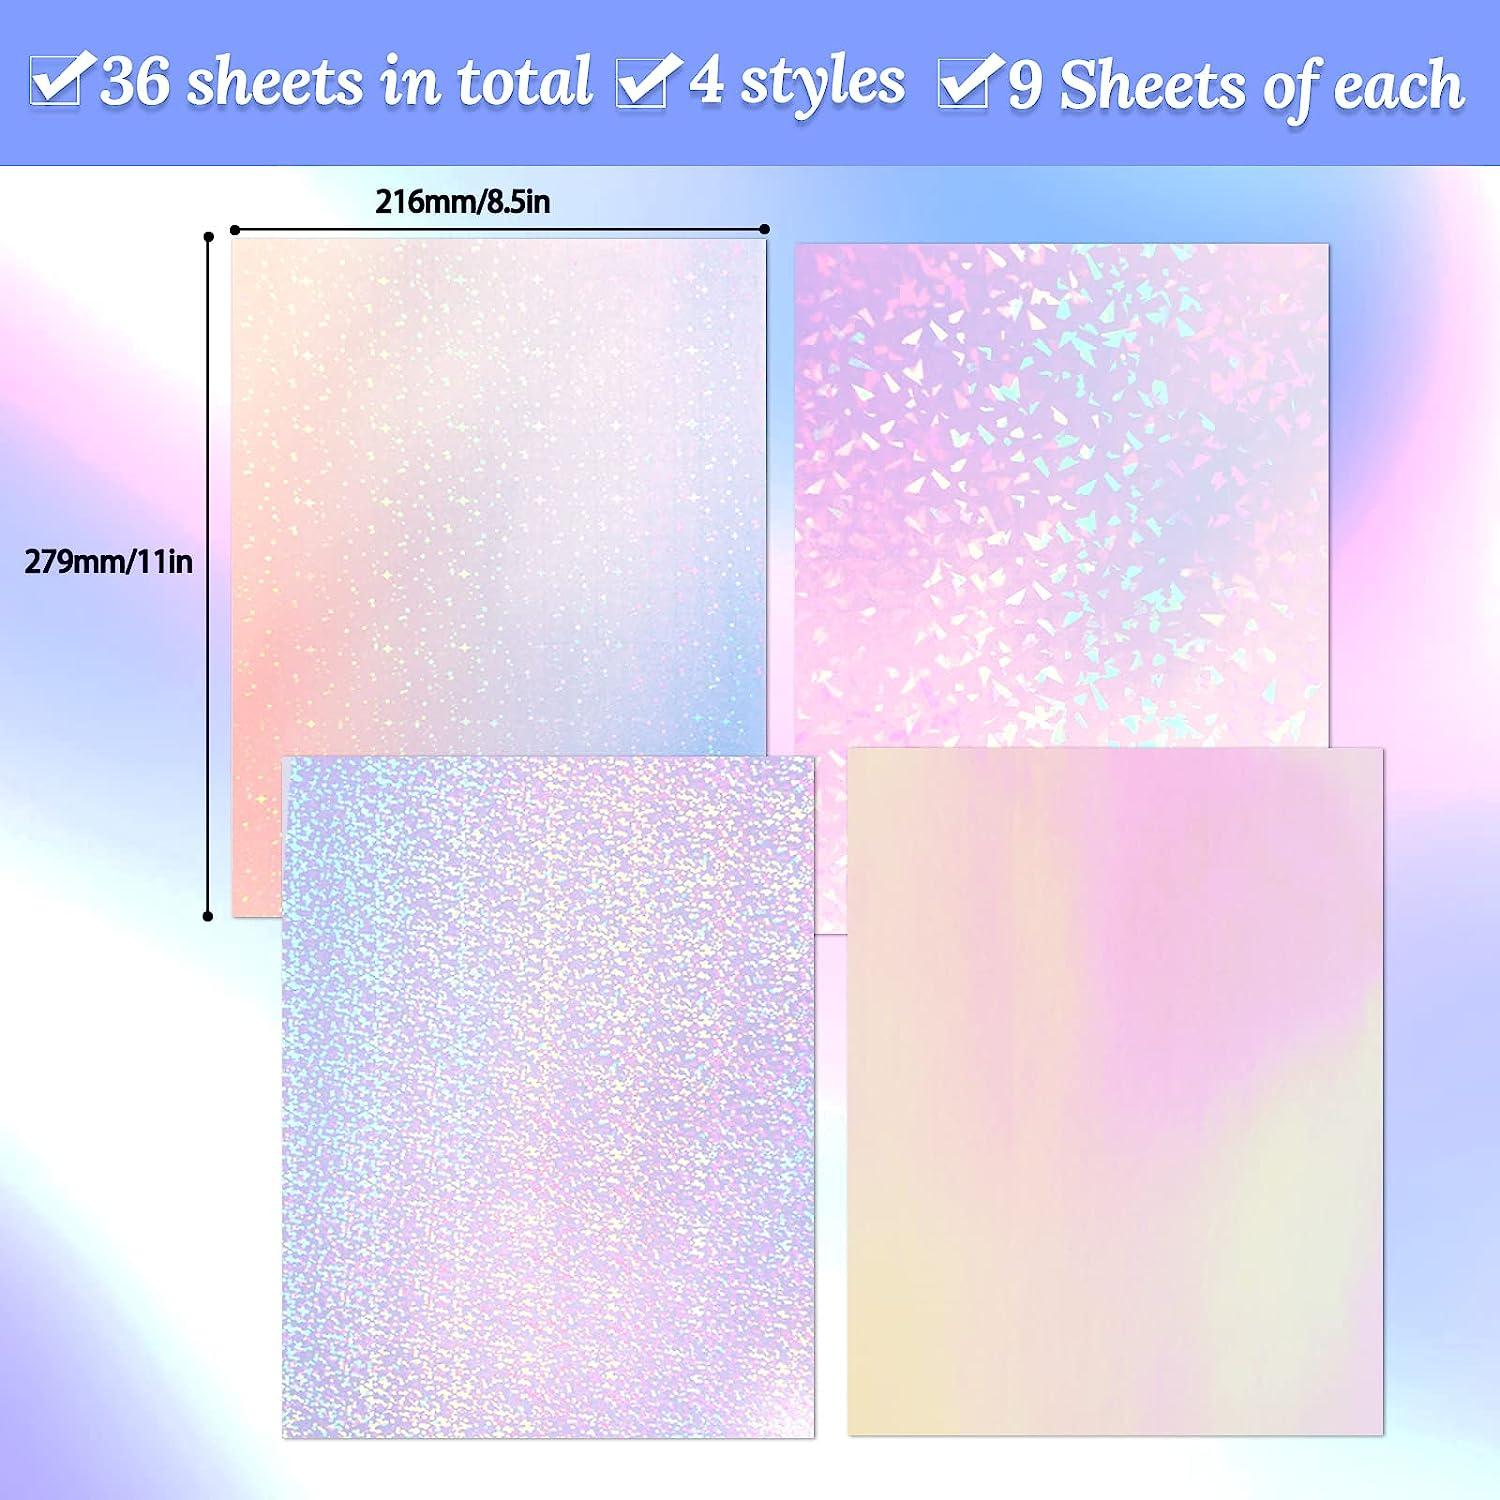 PIXEL Holographic Overlay Film A4 Sheet